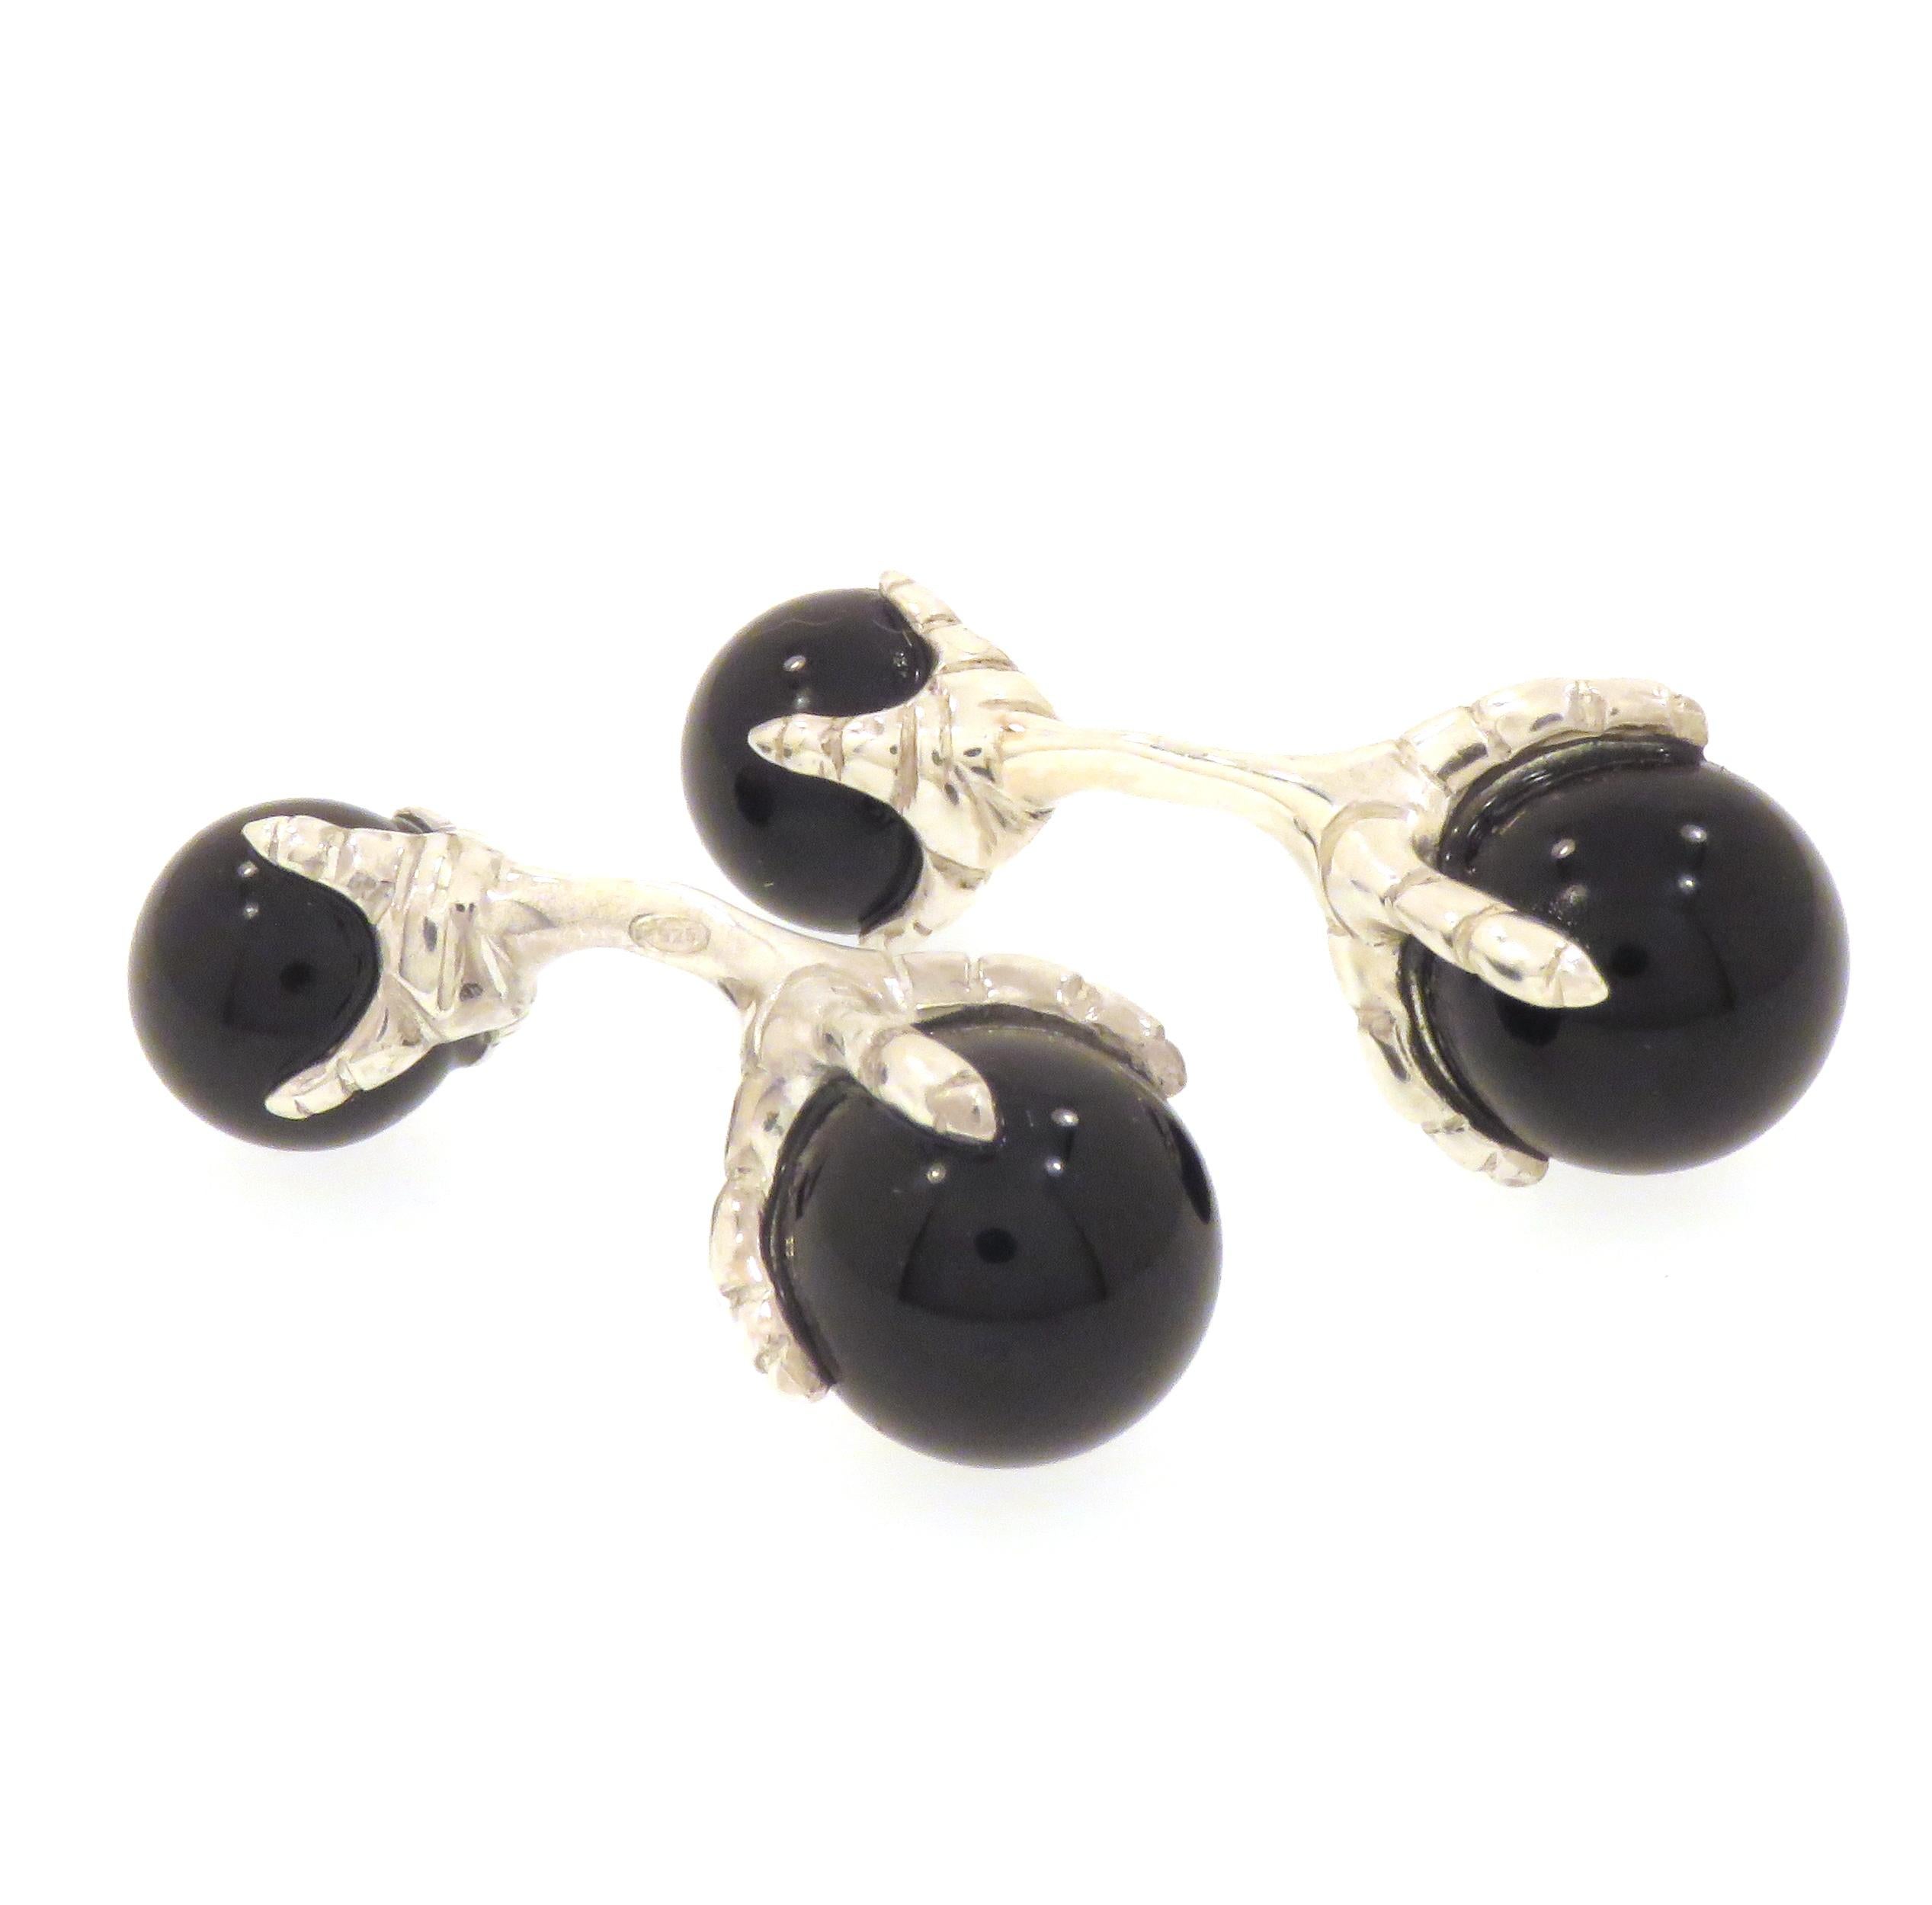 Beautiful cufflinks crafted insterling silver featuring eagle talons grabbing onyx beads. The size of the bigger beads is 12 millimeters / 0.472 inches and of the smaller ones is 10 millimeters / 0.393 inches.  These cufflinks are handcrafted in